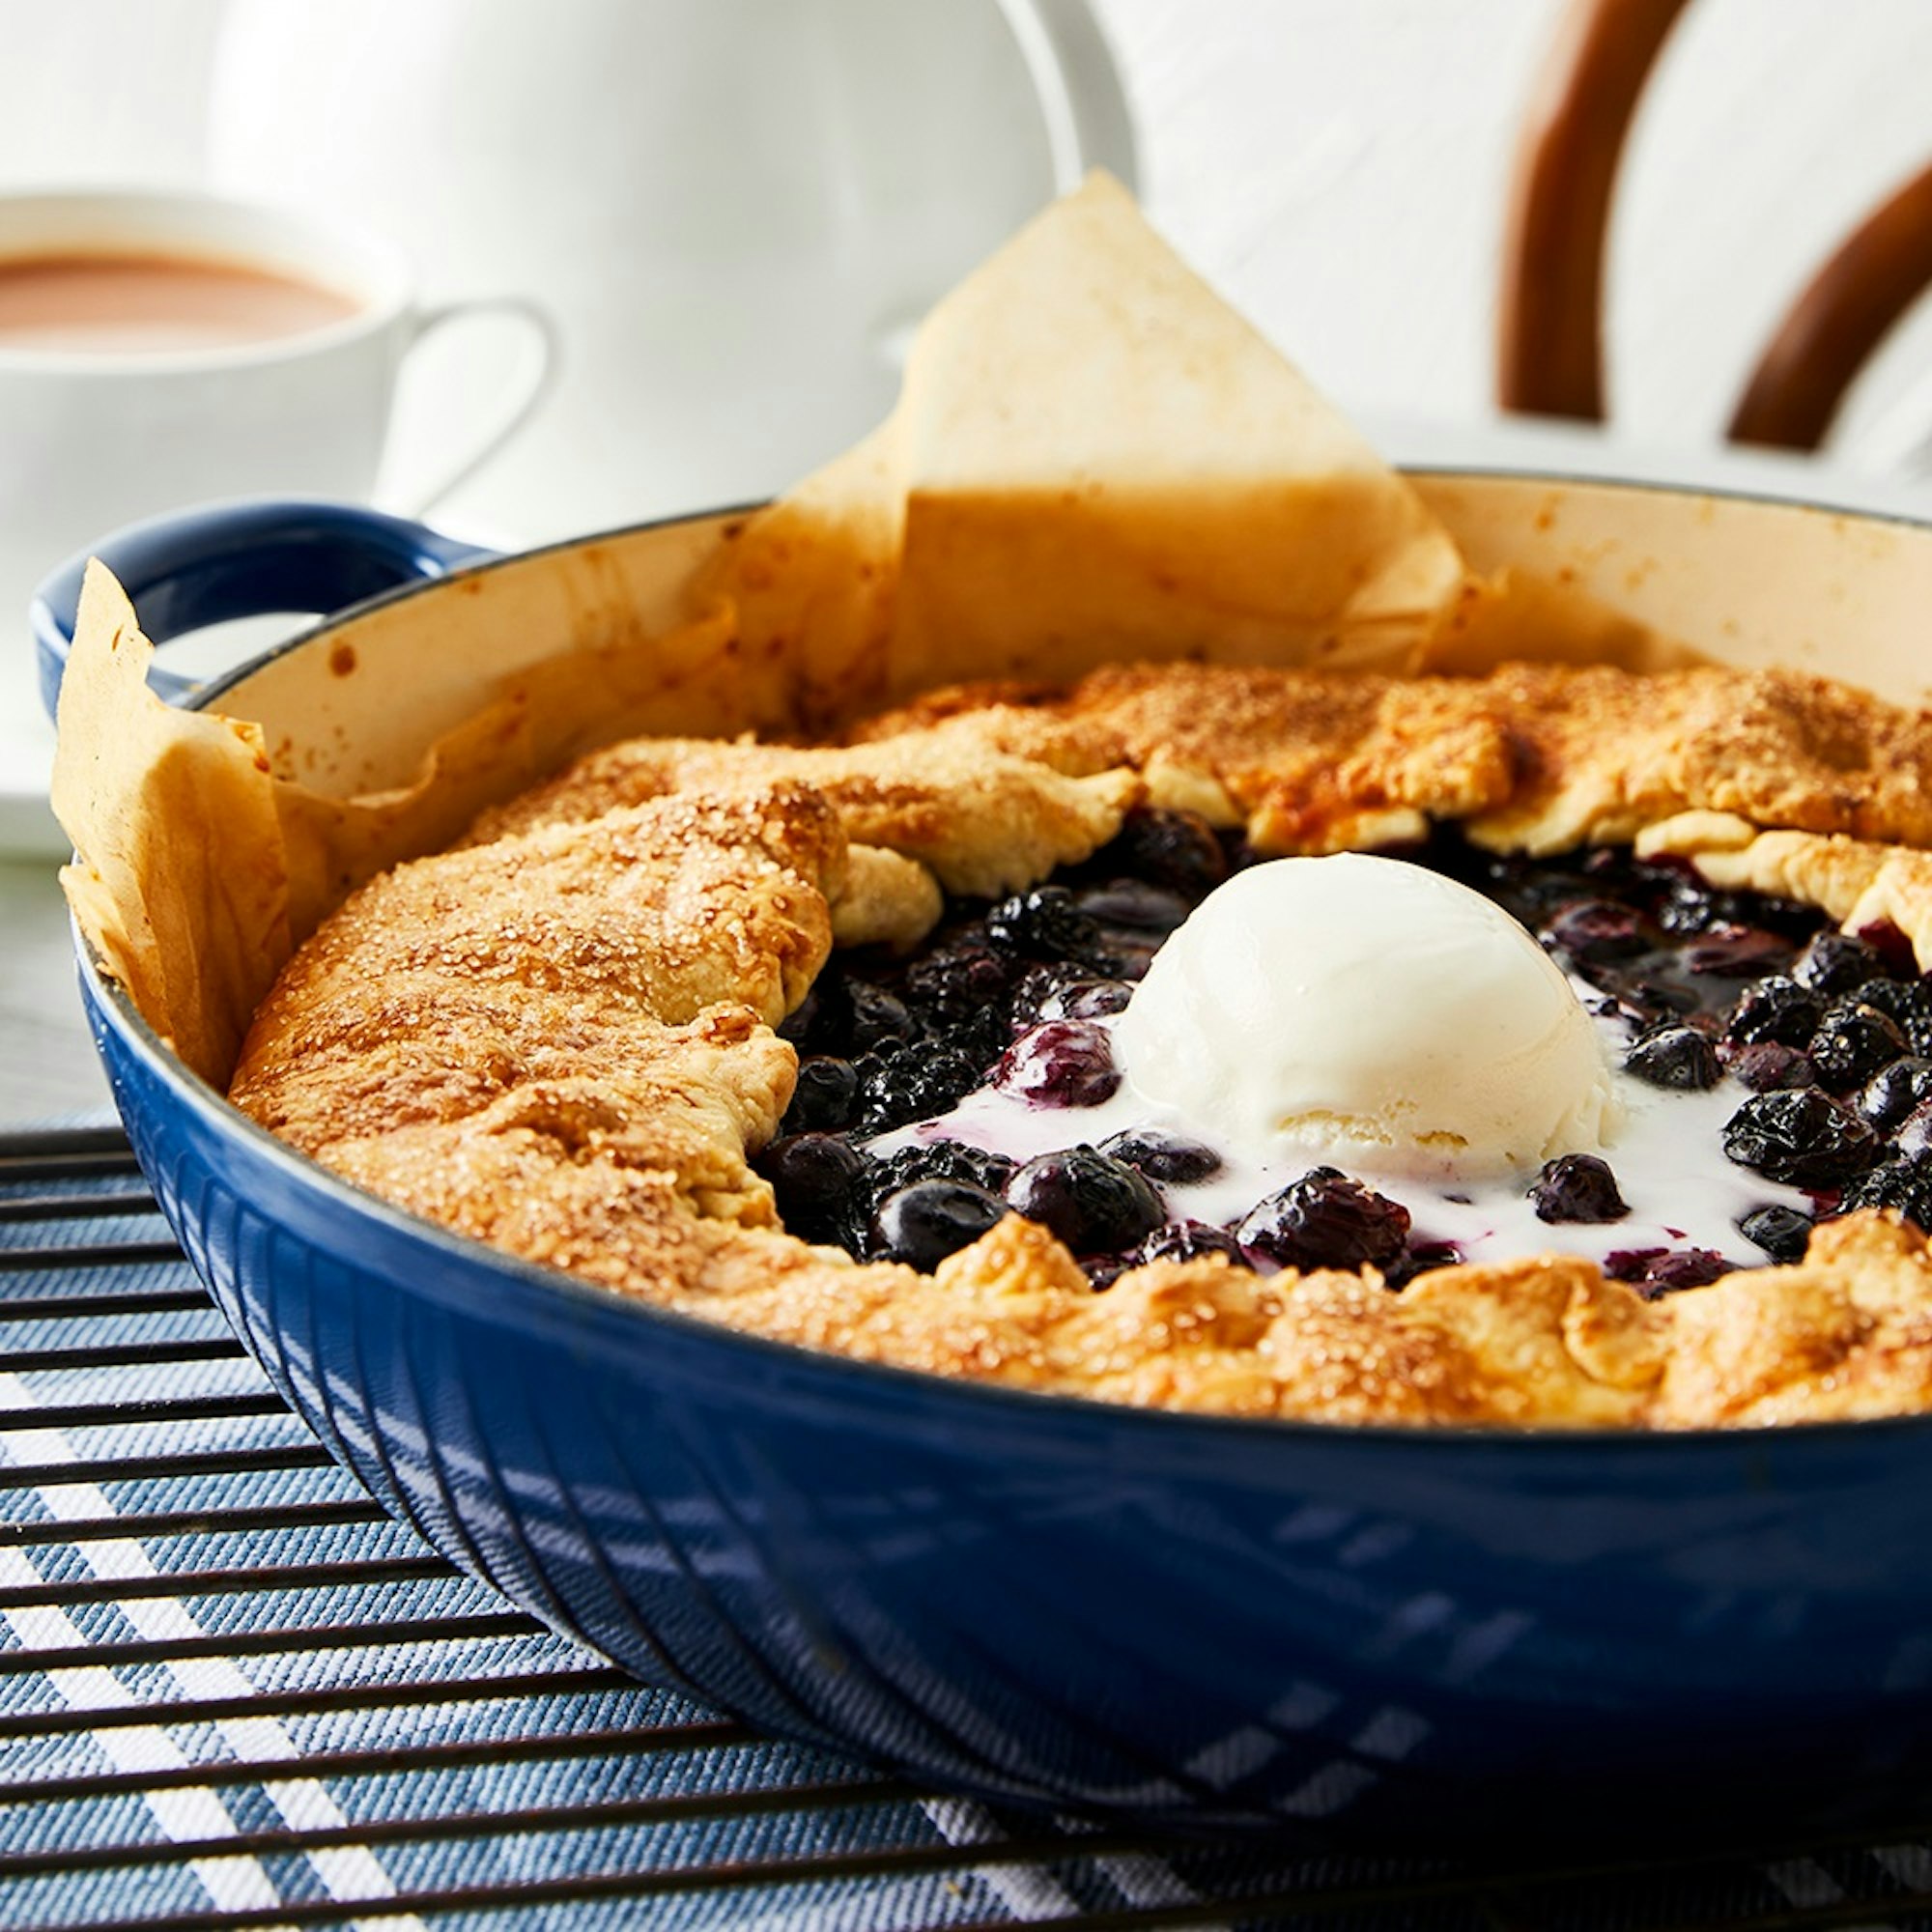 Blueberry and Blackberry Galette Recipe